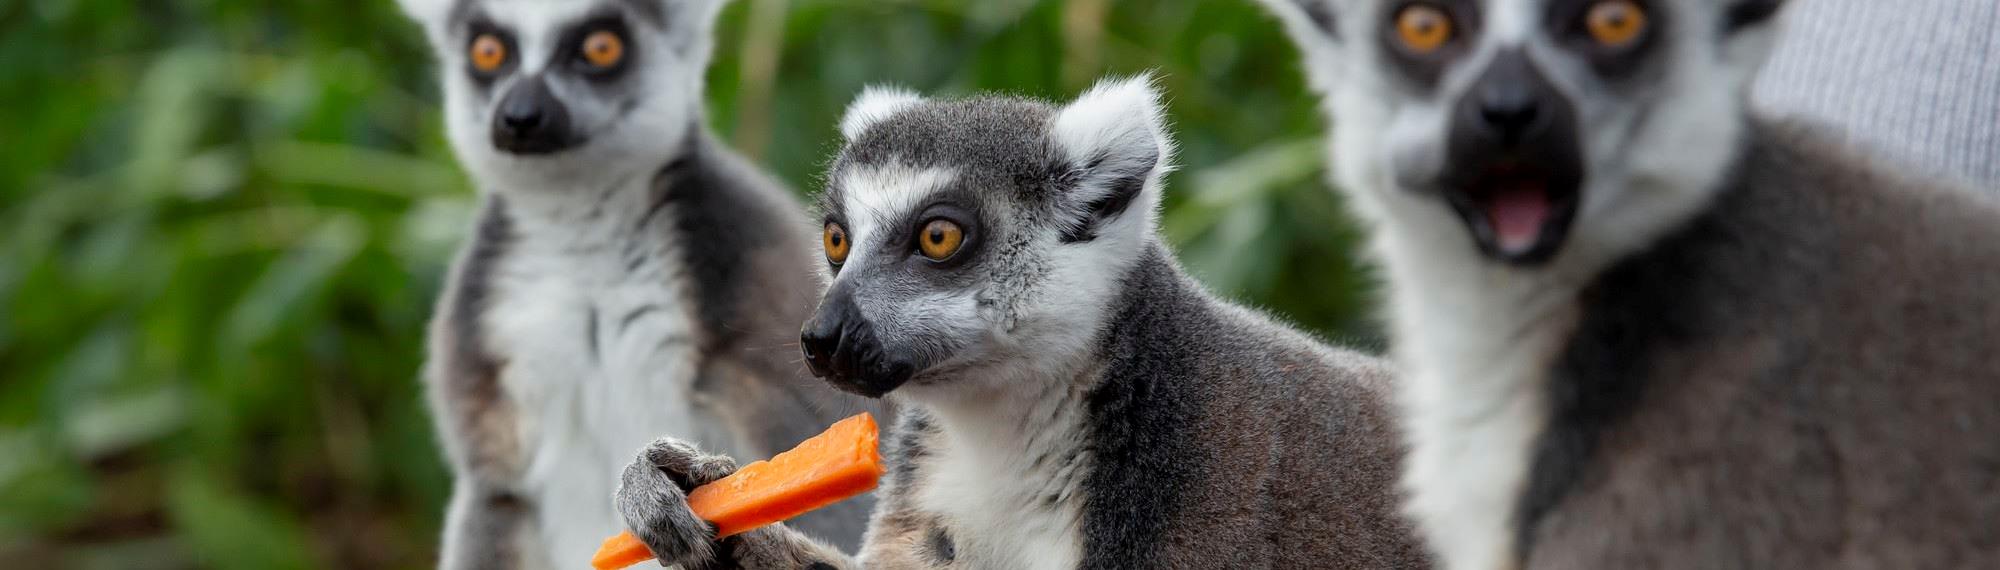 Three lemurs close up, one eating a carrot